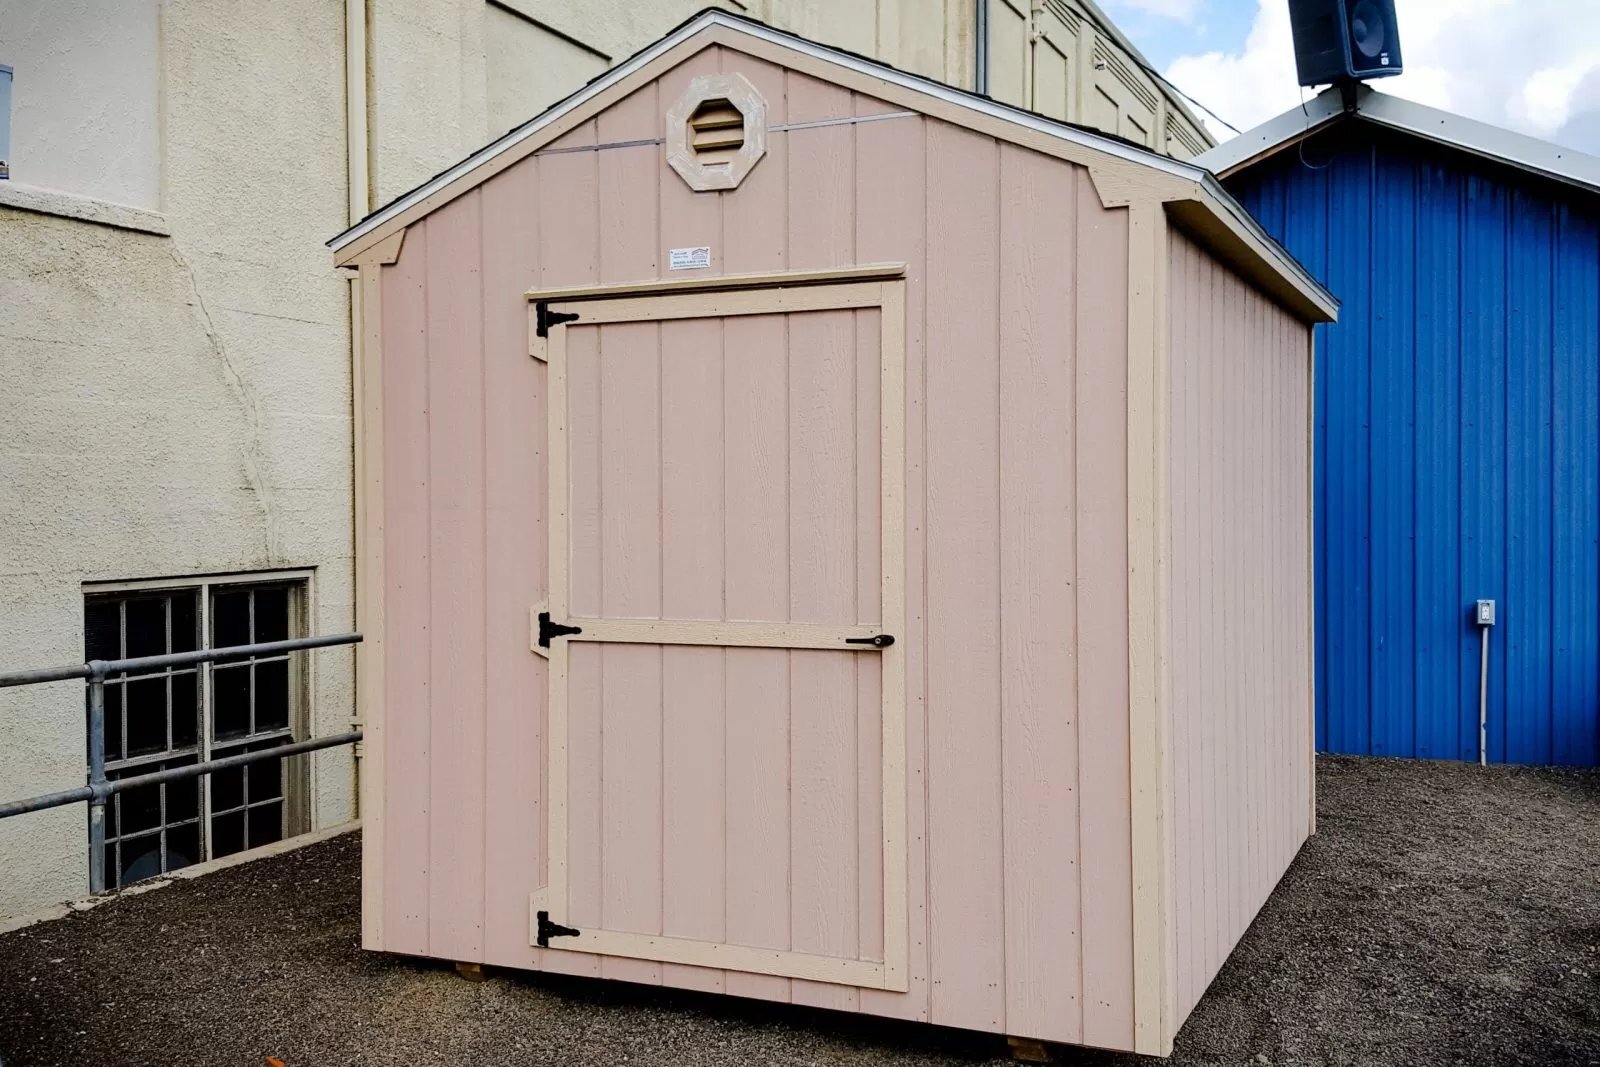 10×10 Shed Plans: DIY Guide To Building Your Own Outdoor Storage Space